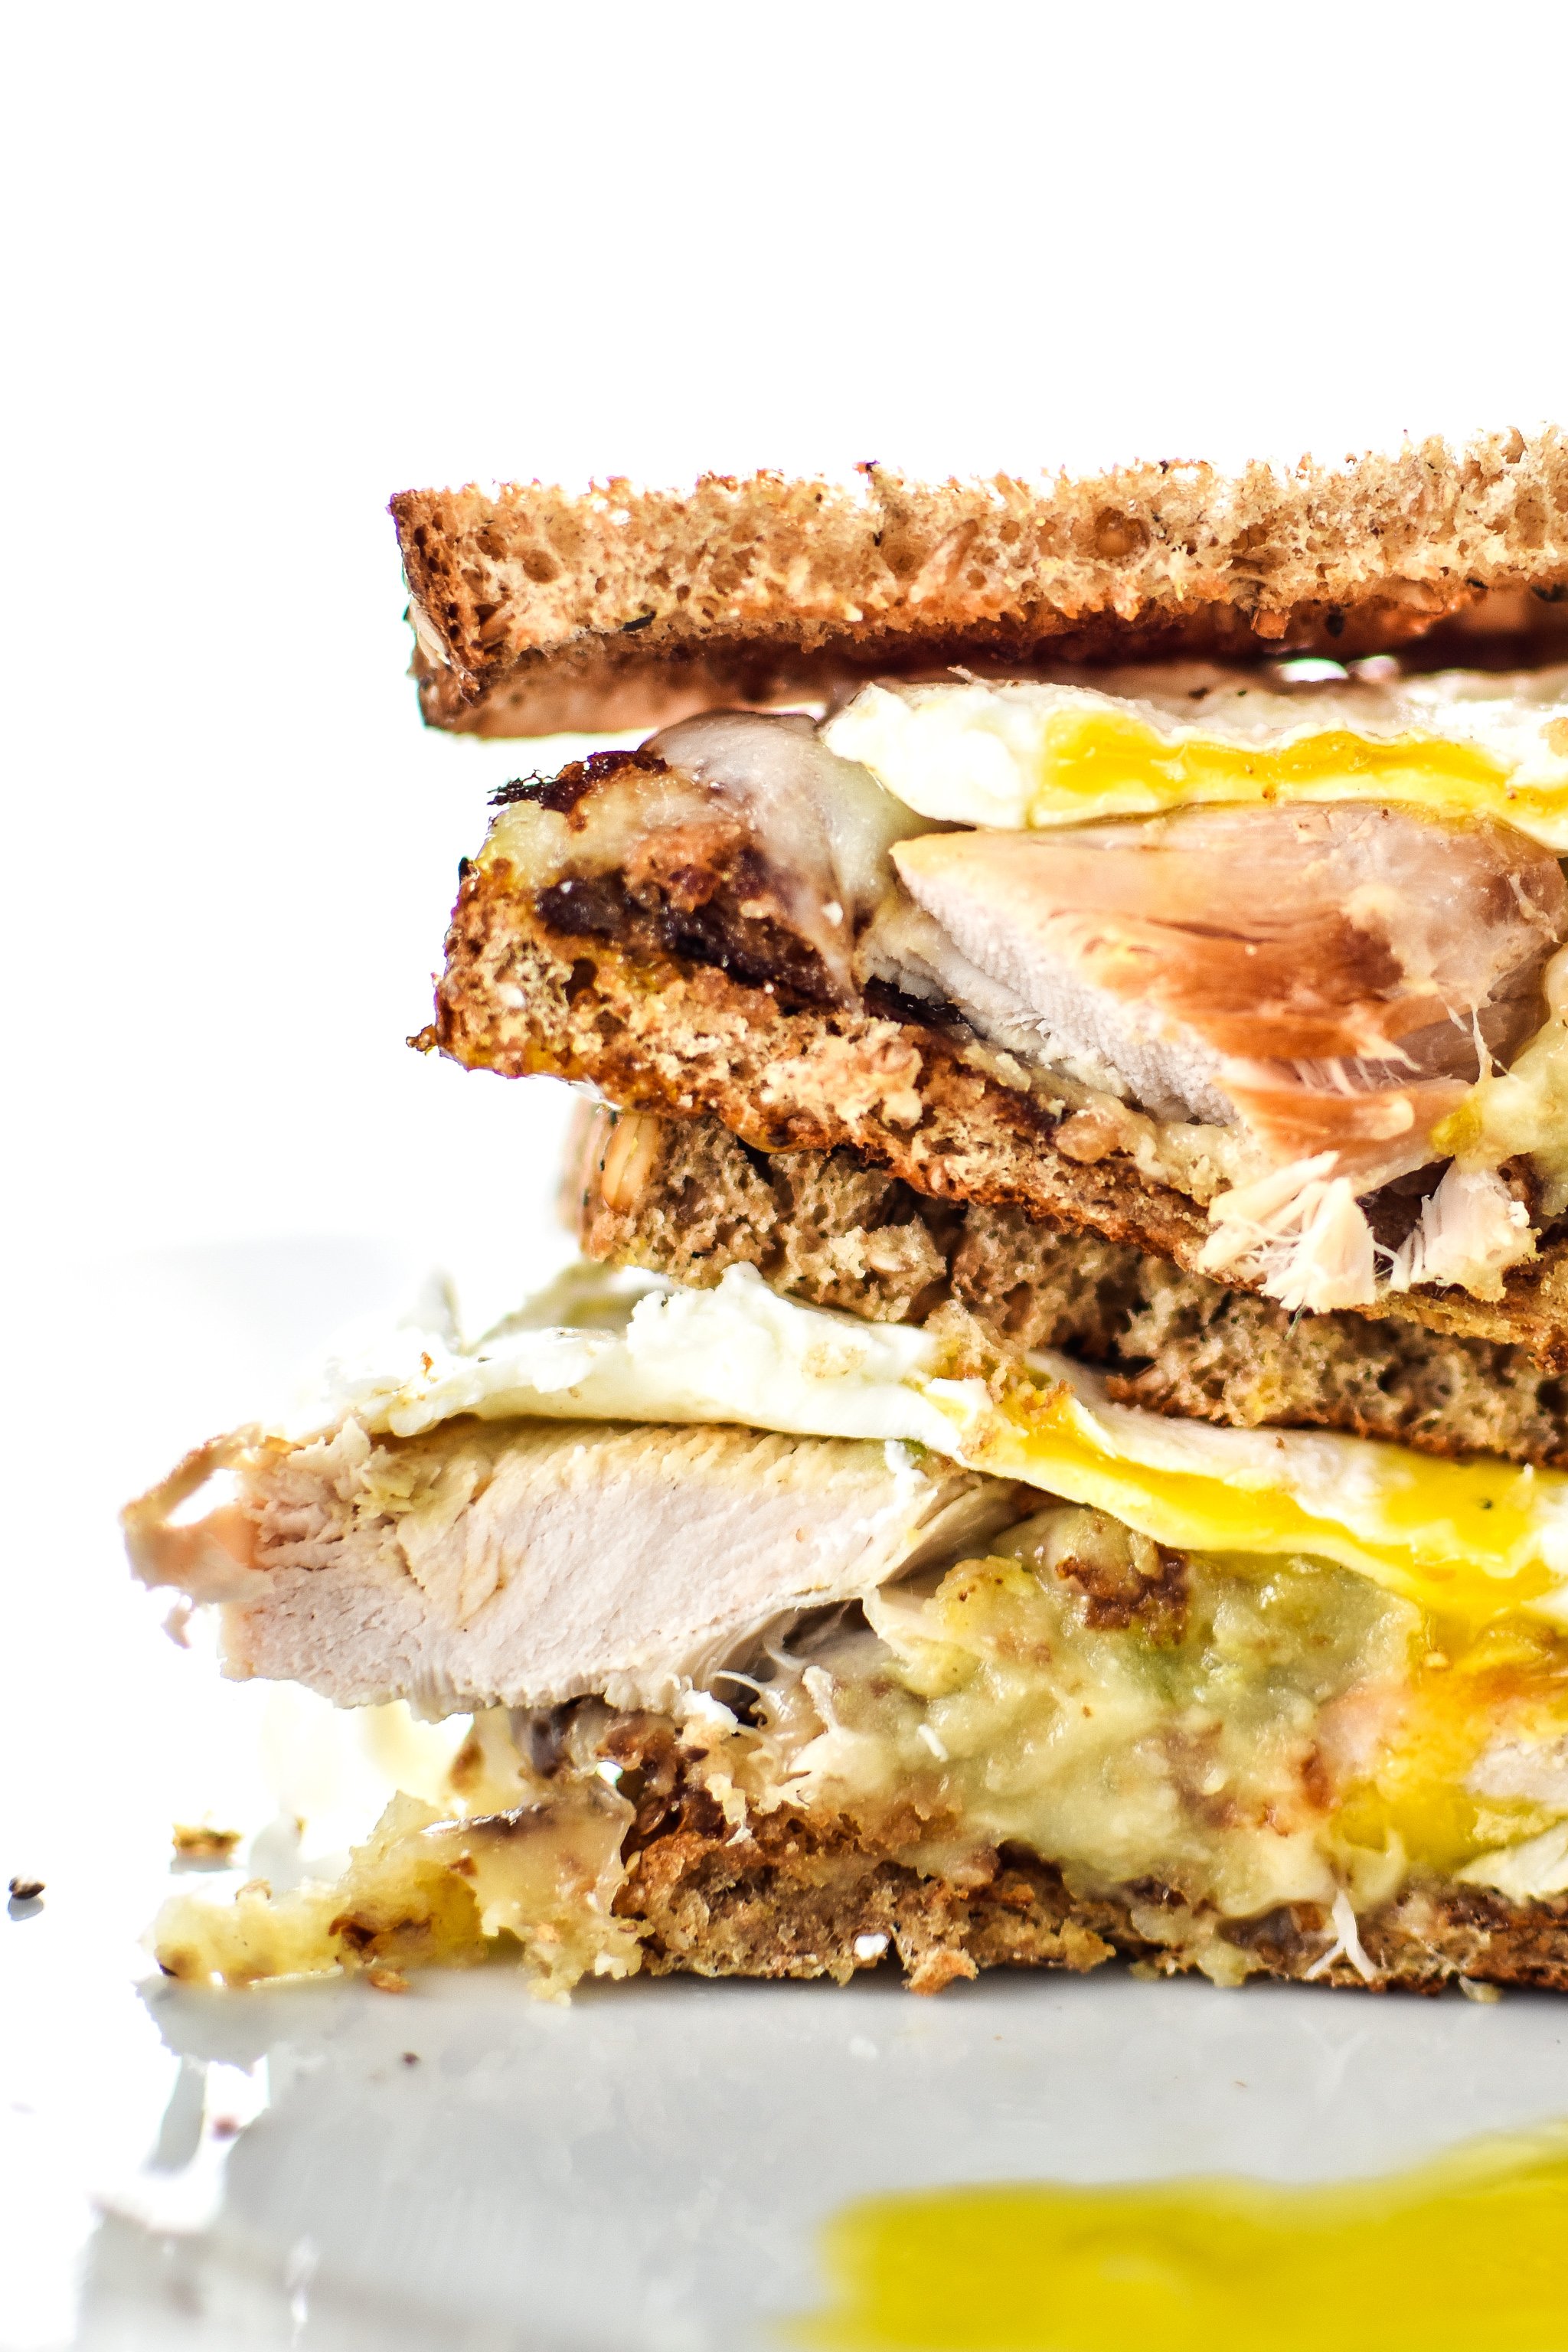 Ultimate Leftover Turkey Breakfast Sandwich - The best use of your holiday leftovers! Stuffing, mashed potatoes, turkey, topped with a fried egg! Take a bite! - ProjectMealPlan.com